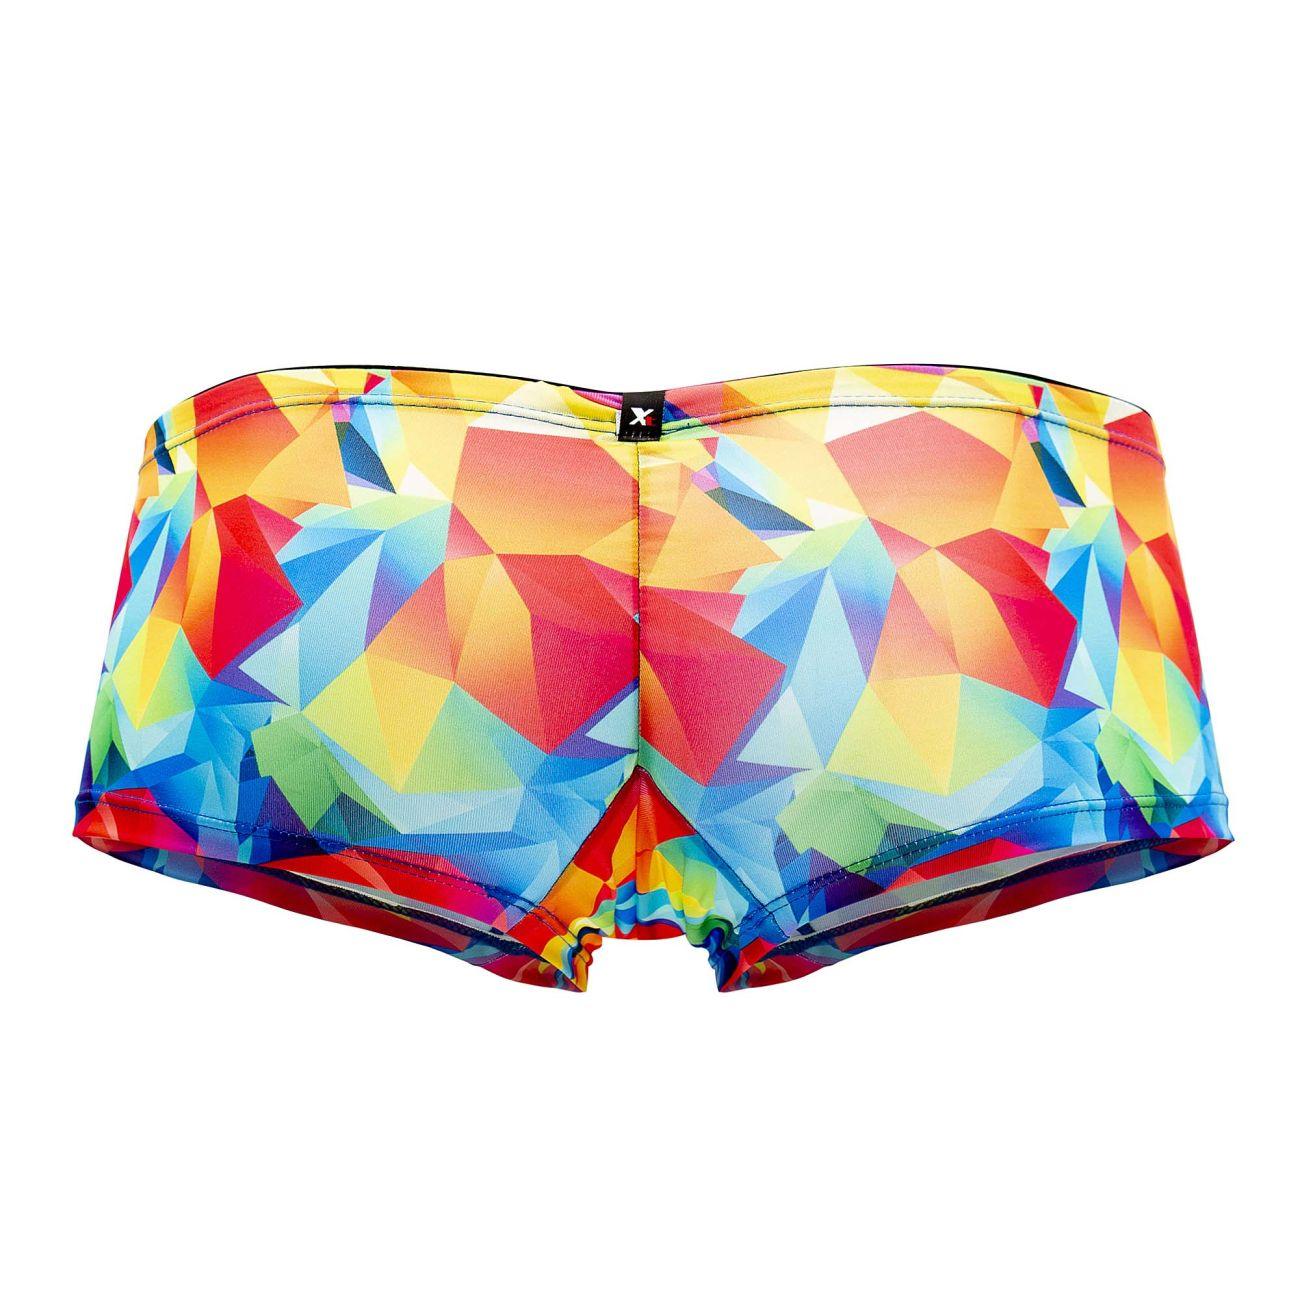 image of product,Printed Microfiber Trunks - SEXYEONE